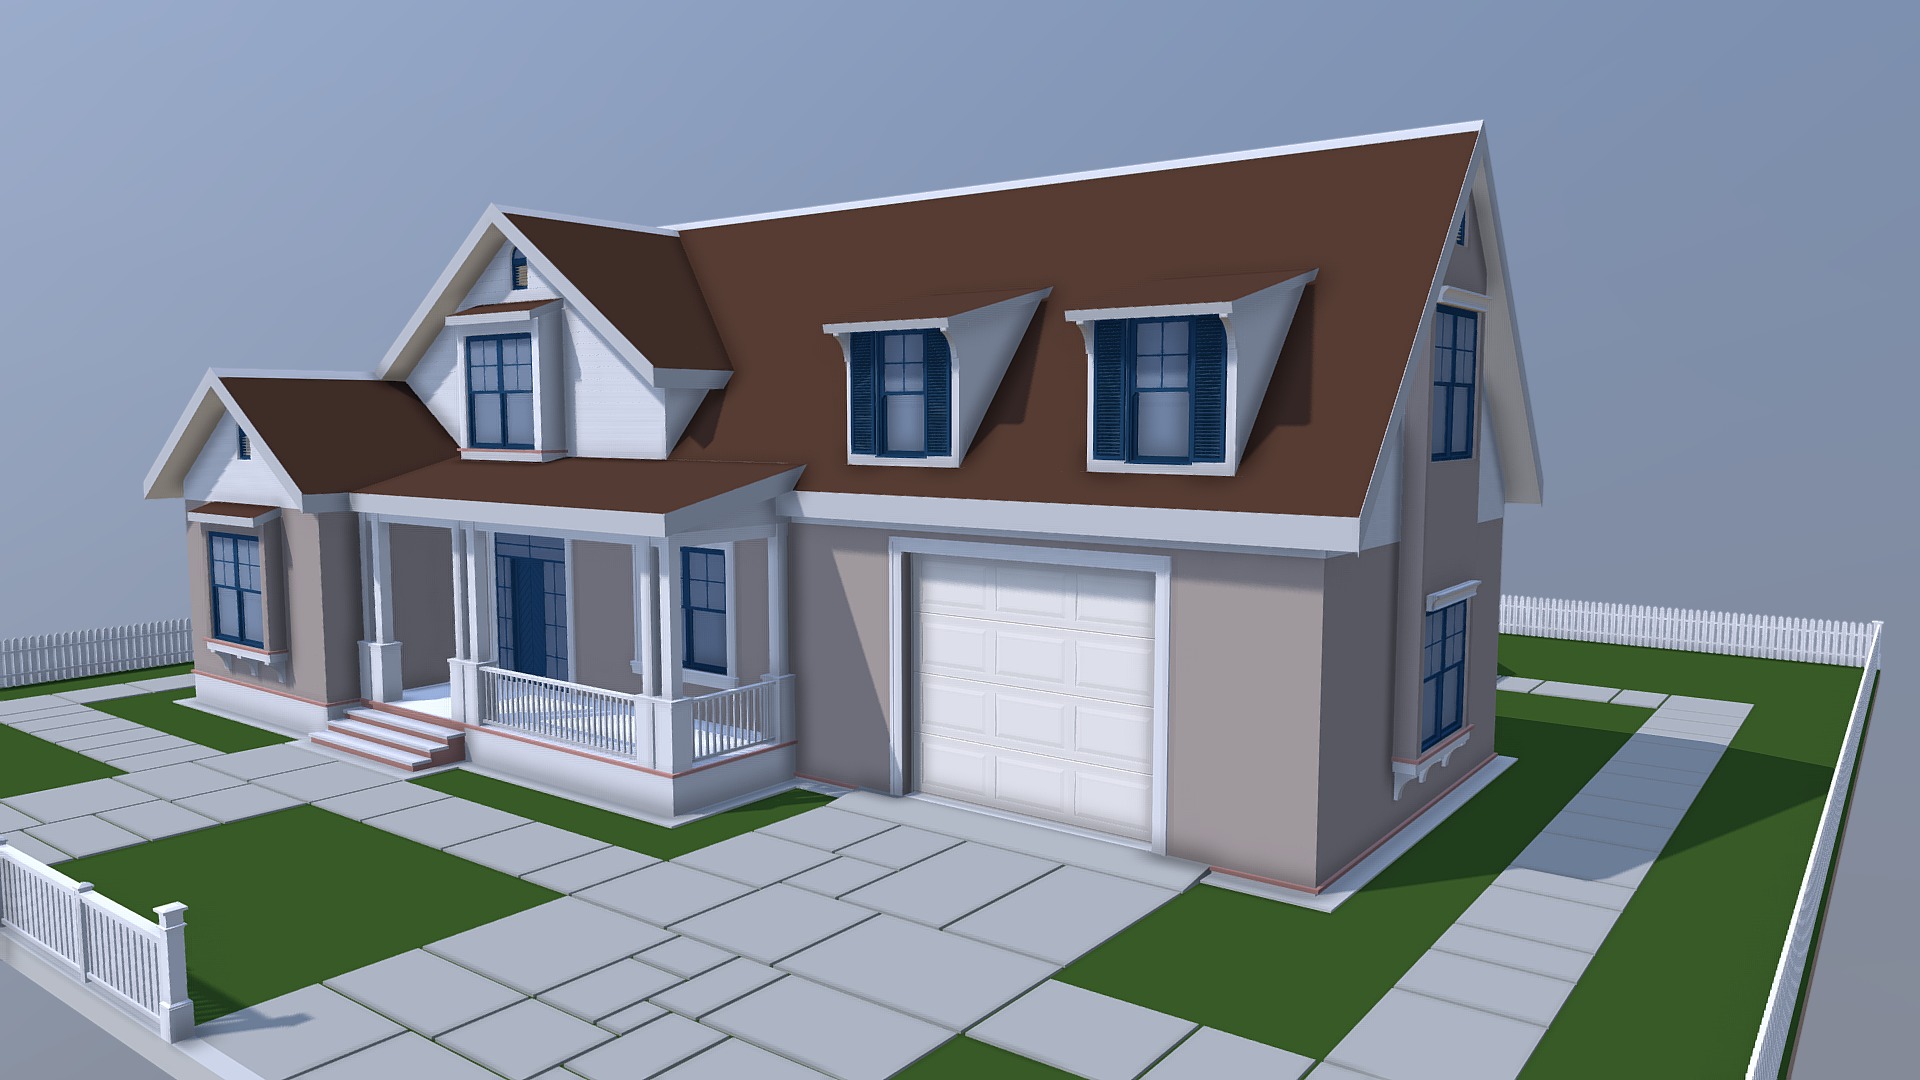 3D model NEOarch Cottage SB 004 (autodesk FBX) - This is a 3D model of the NEOarch Cottage SB 004 (autodesk FBX). The 3D model is about a house with a driveway.